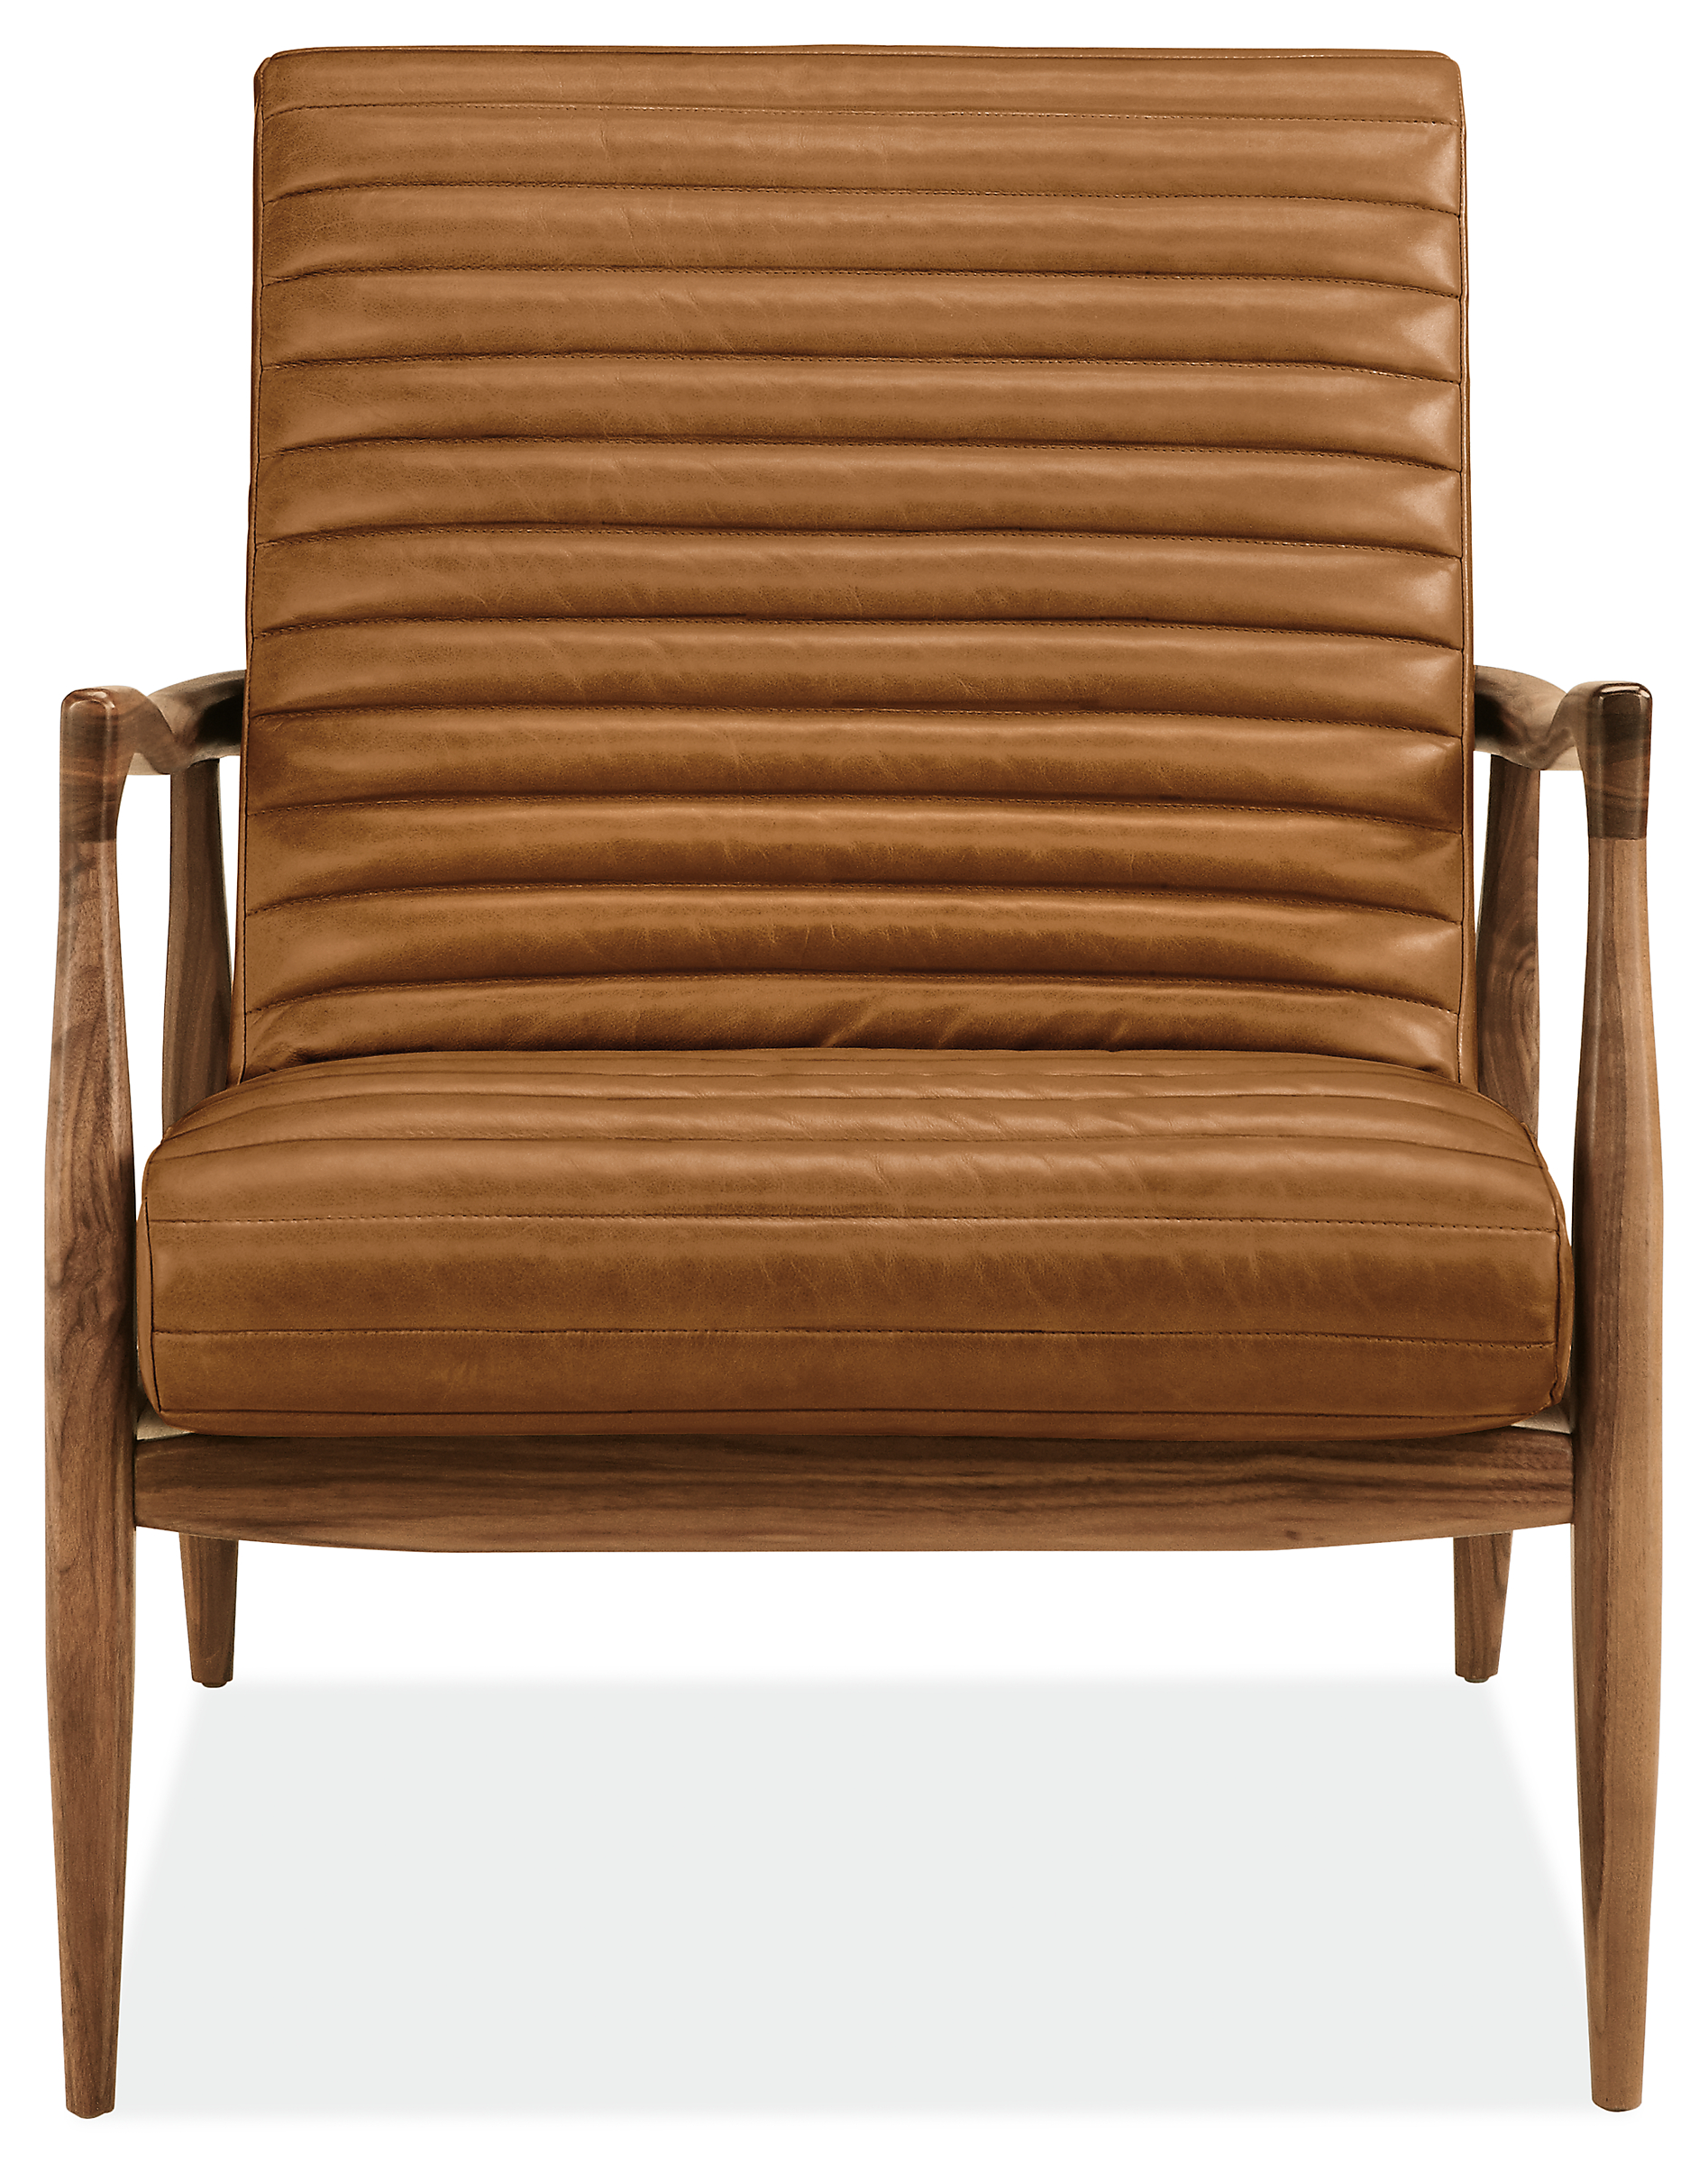 Front view of Callan Chair in Portofino Leather.